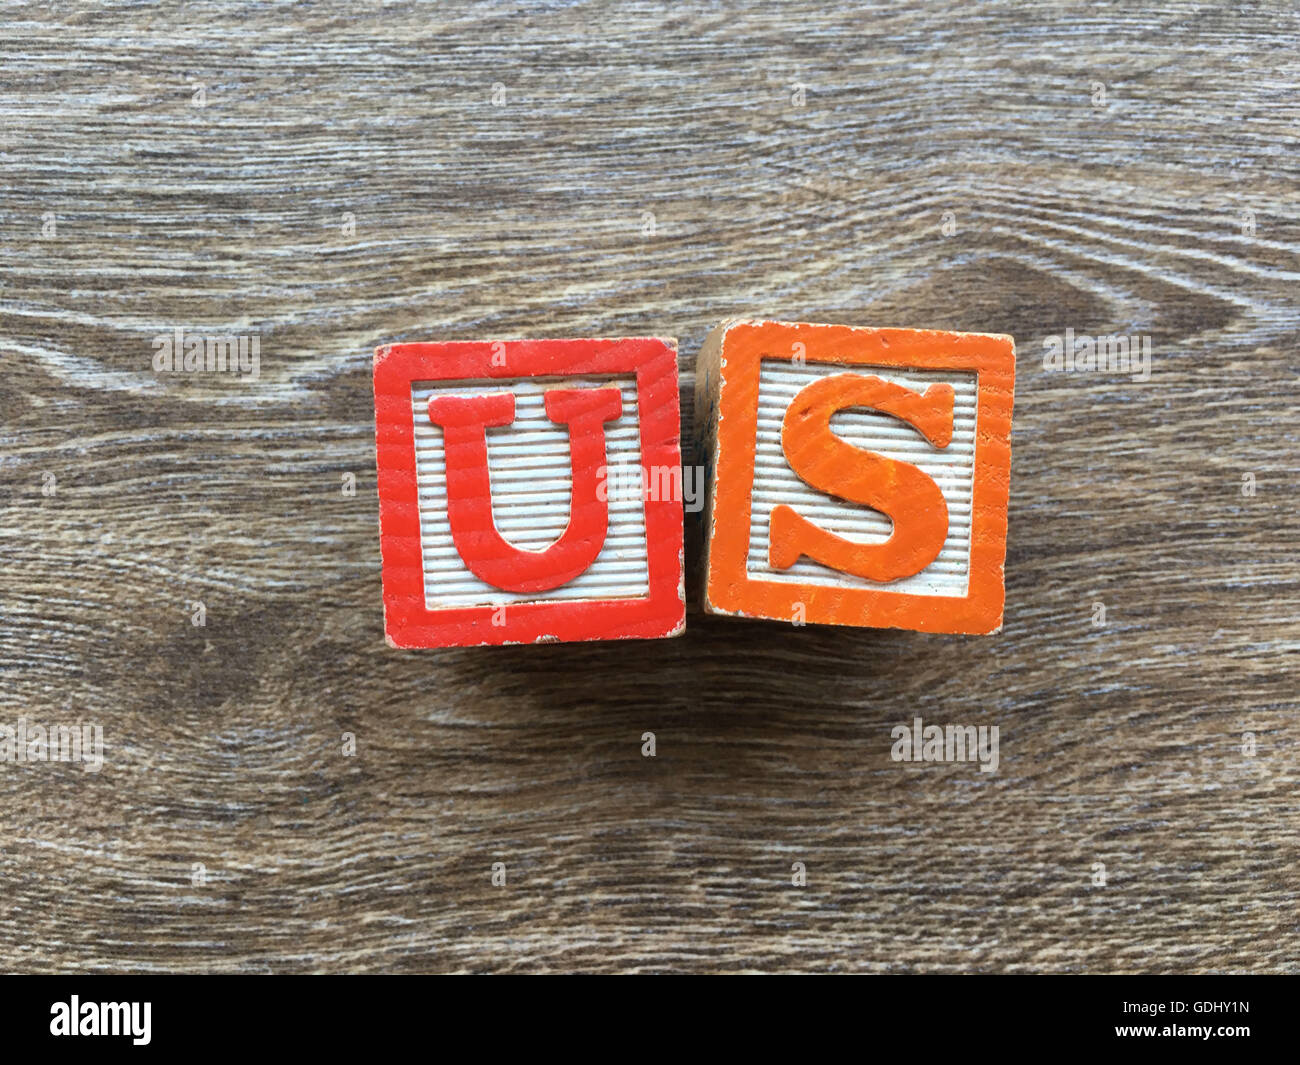 US Abbreviation word written with alphabet wood block letter toys Stock Photo